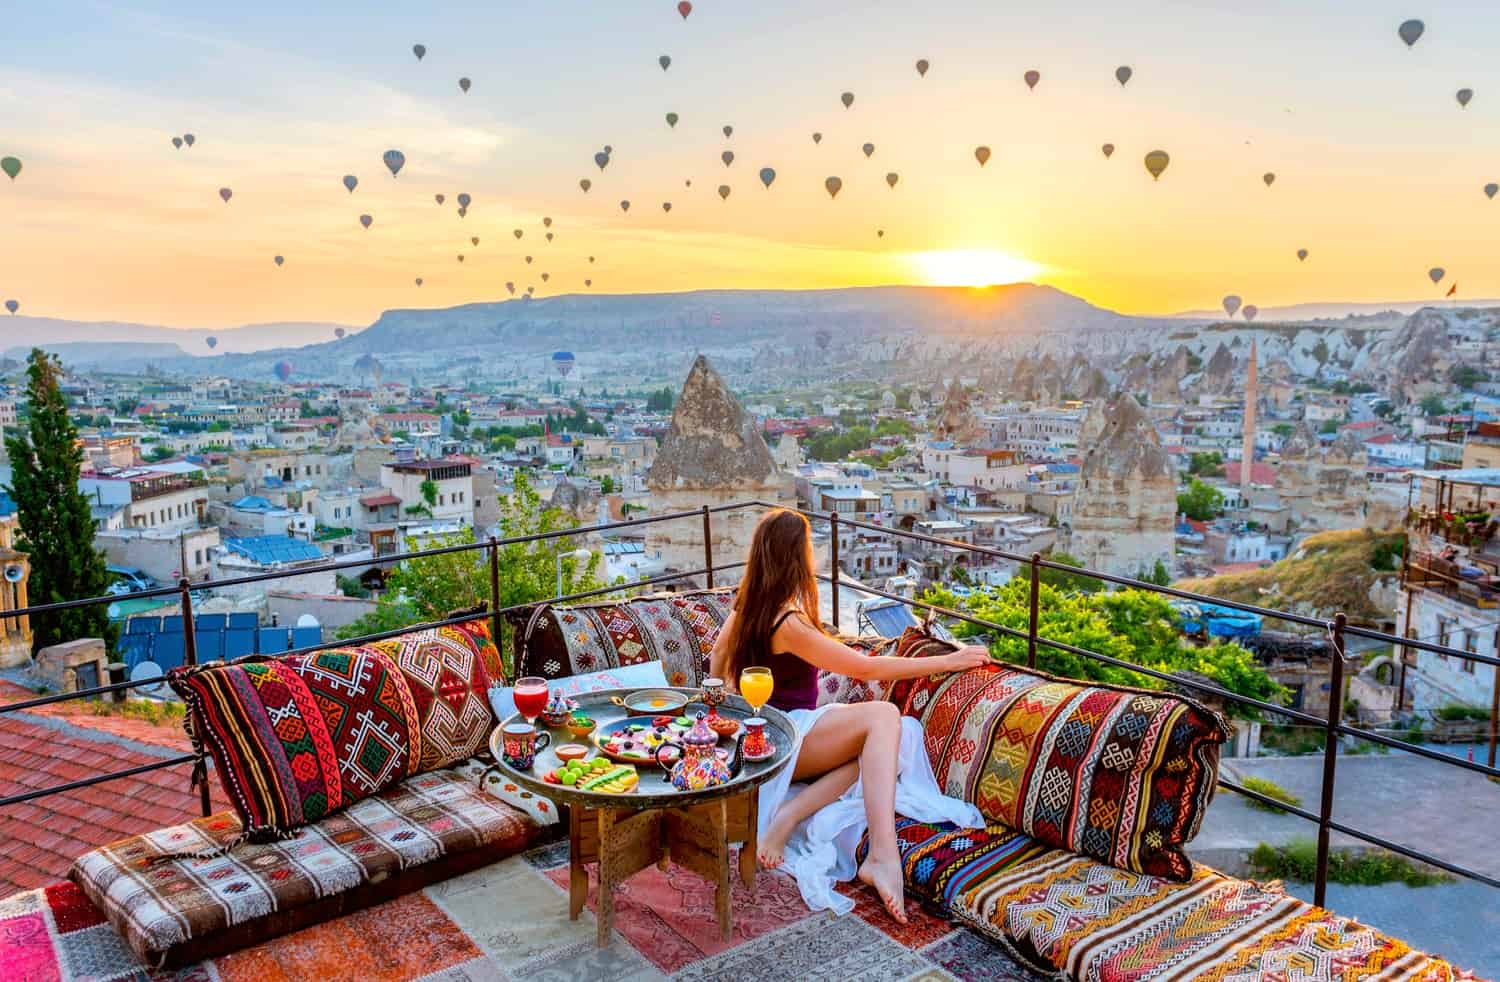 Girl on a rooftop terrace with cushions and breakfast on a tray, turned to watch dozens of hot air balloons rising into the air above the town of Cappadocia